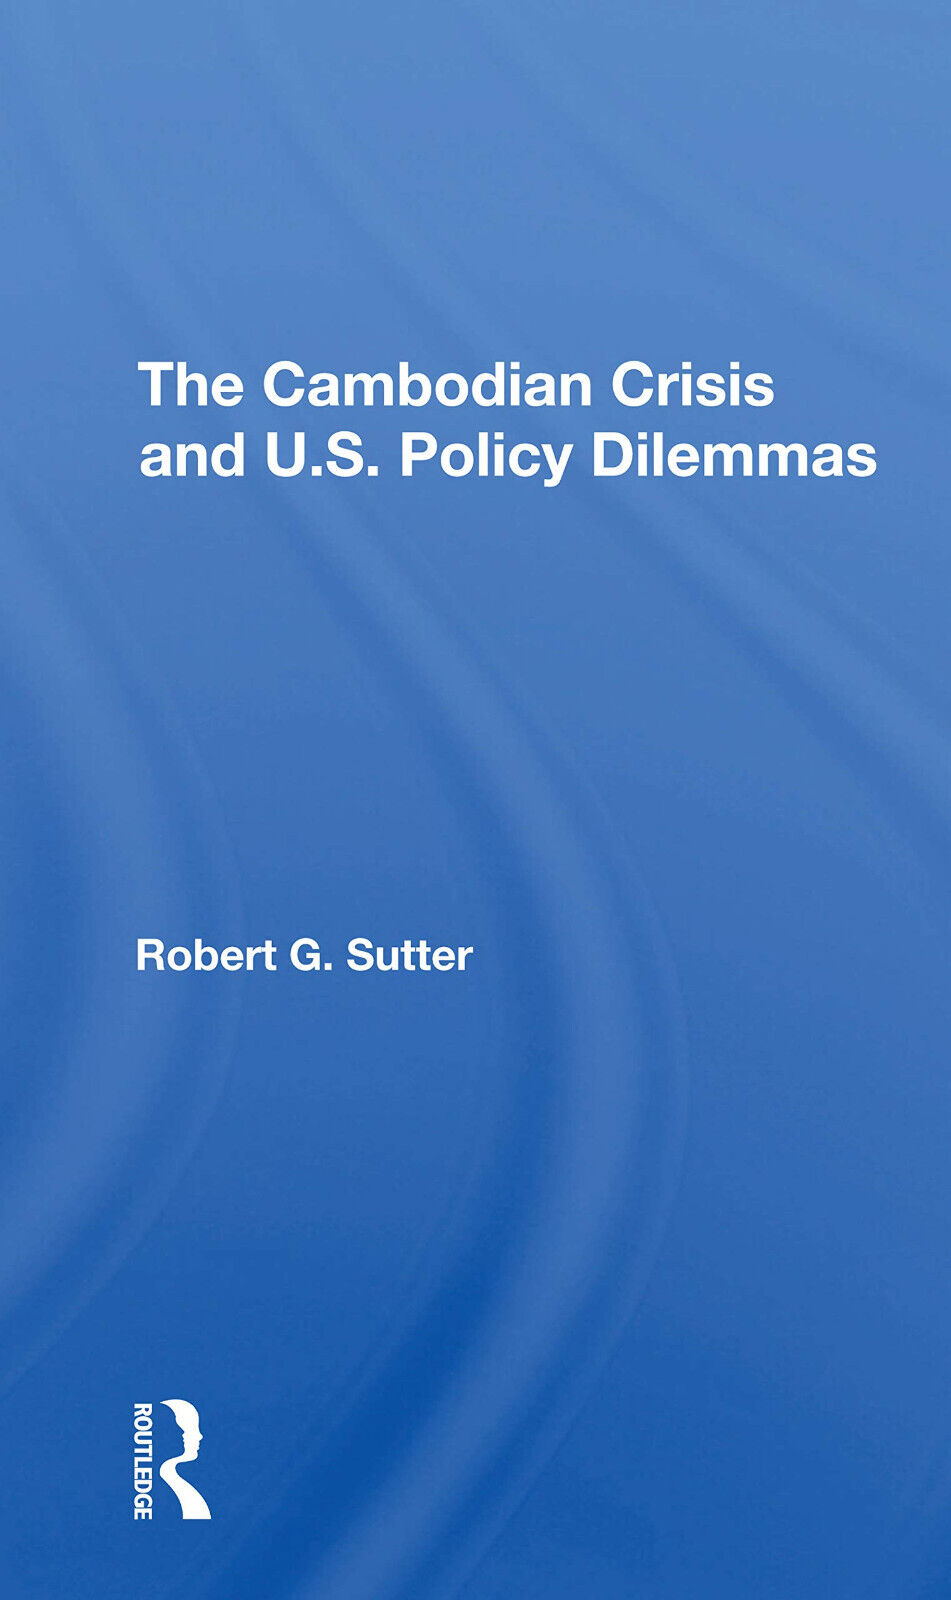 The Cambodian Crisis And U.s. Policy Dilemmas - Robert G Sutter - 2021